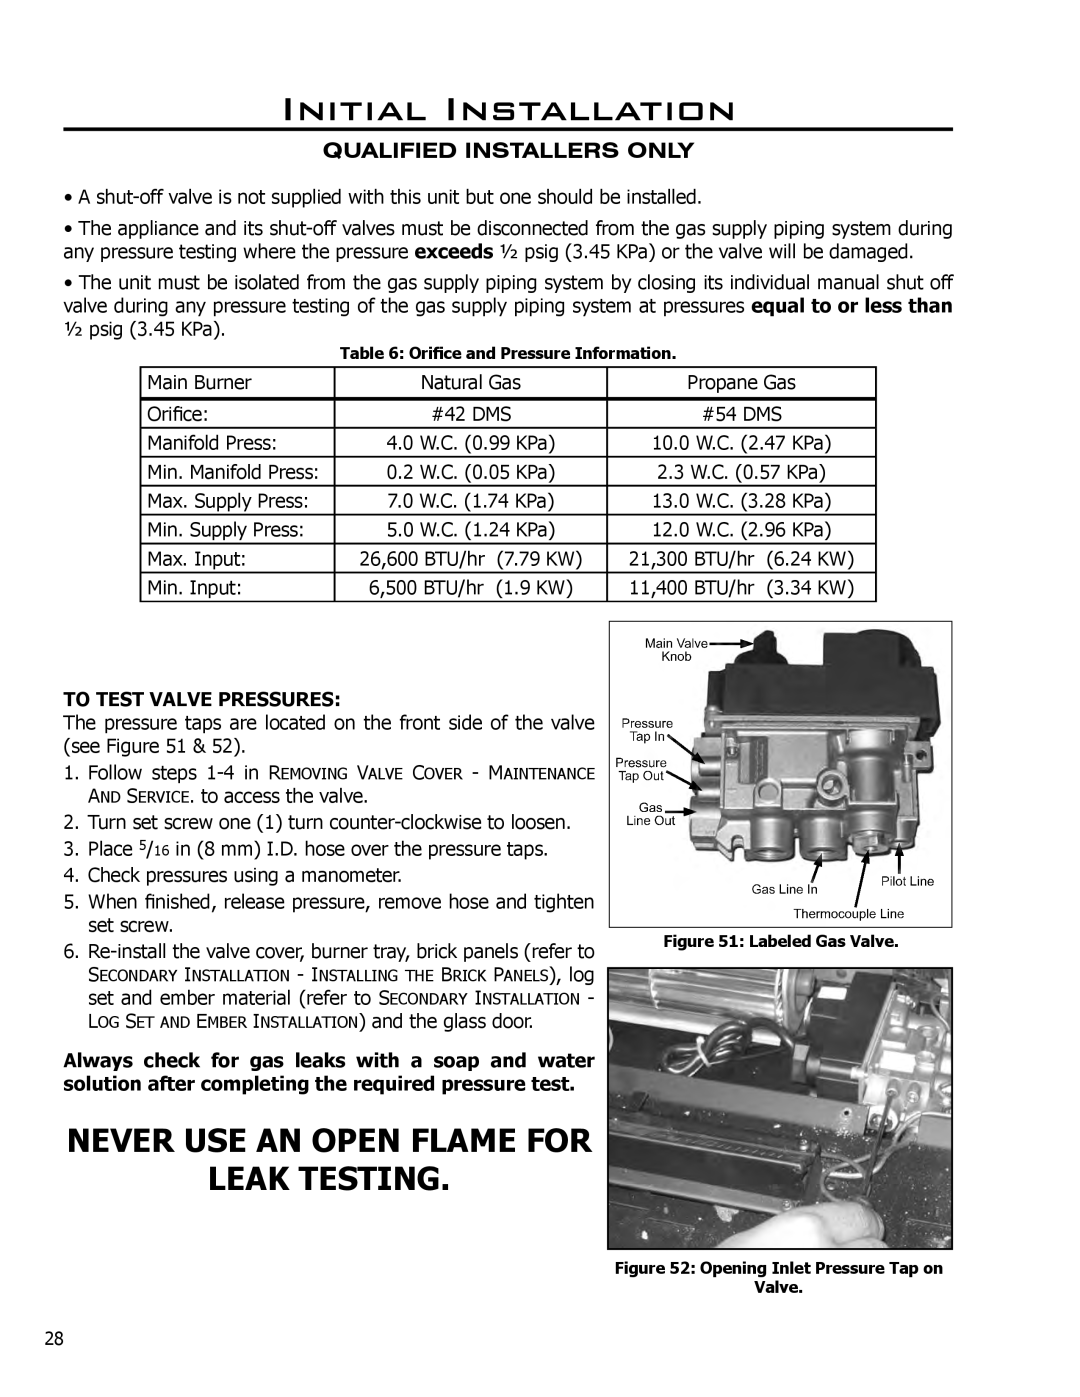 Enviro C-11102, C-11253, 50-1472 To Test Valve Pressures, Initial Installation, Never Use An Open Flame For Leak Testing 